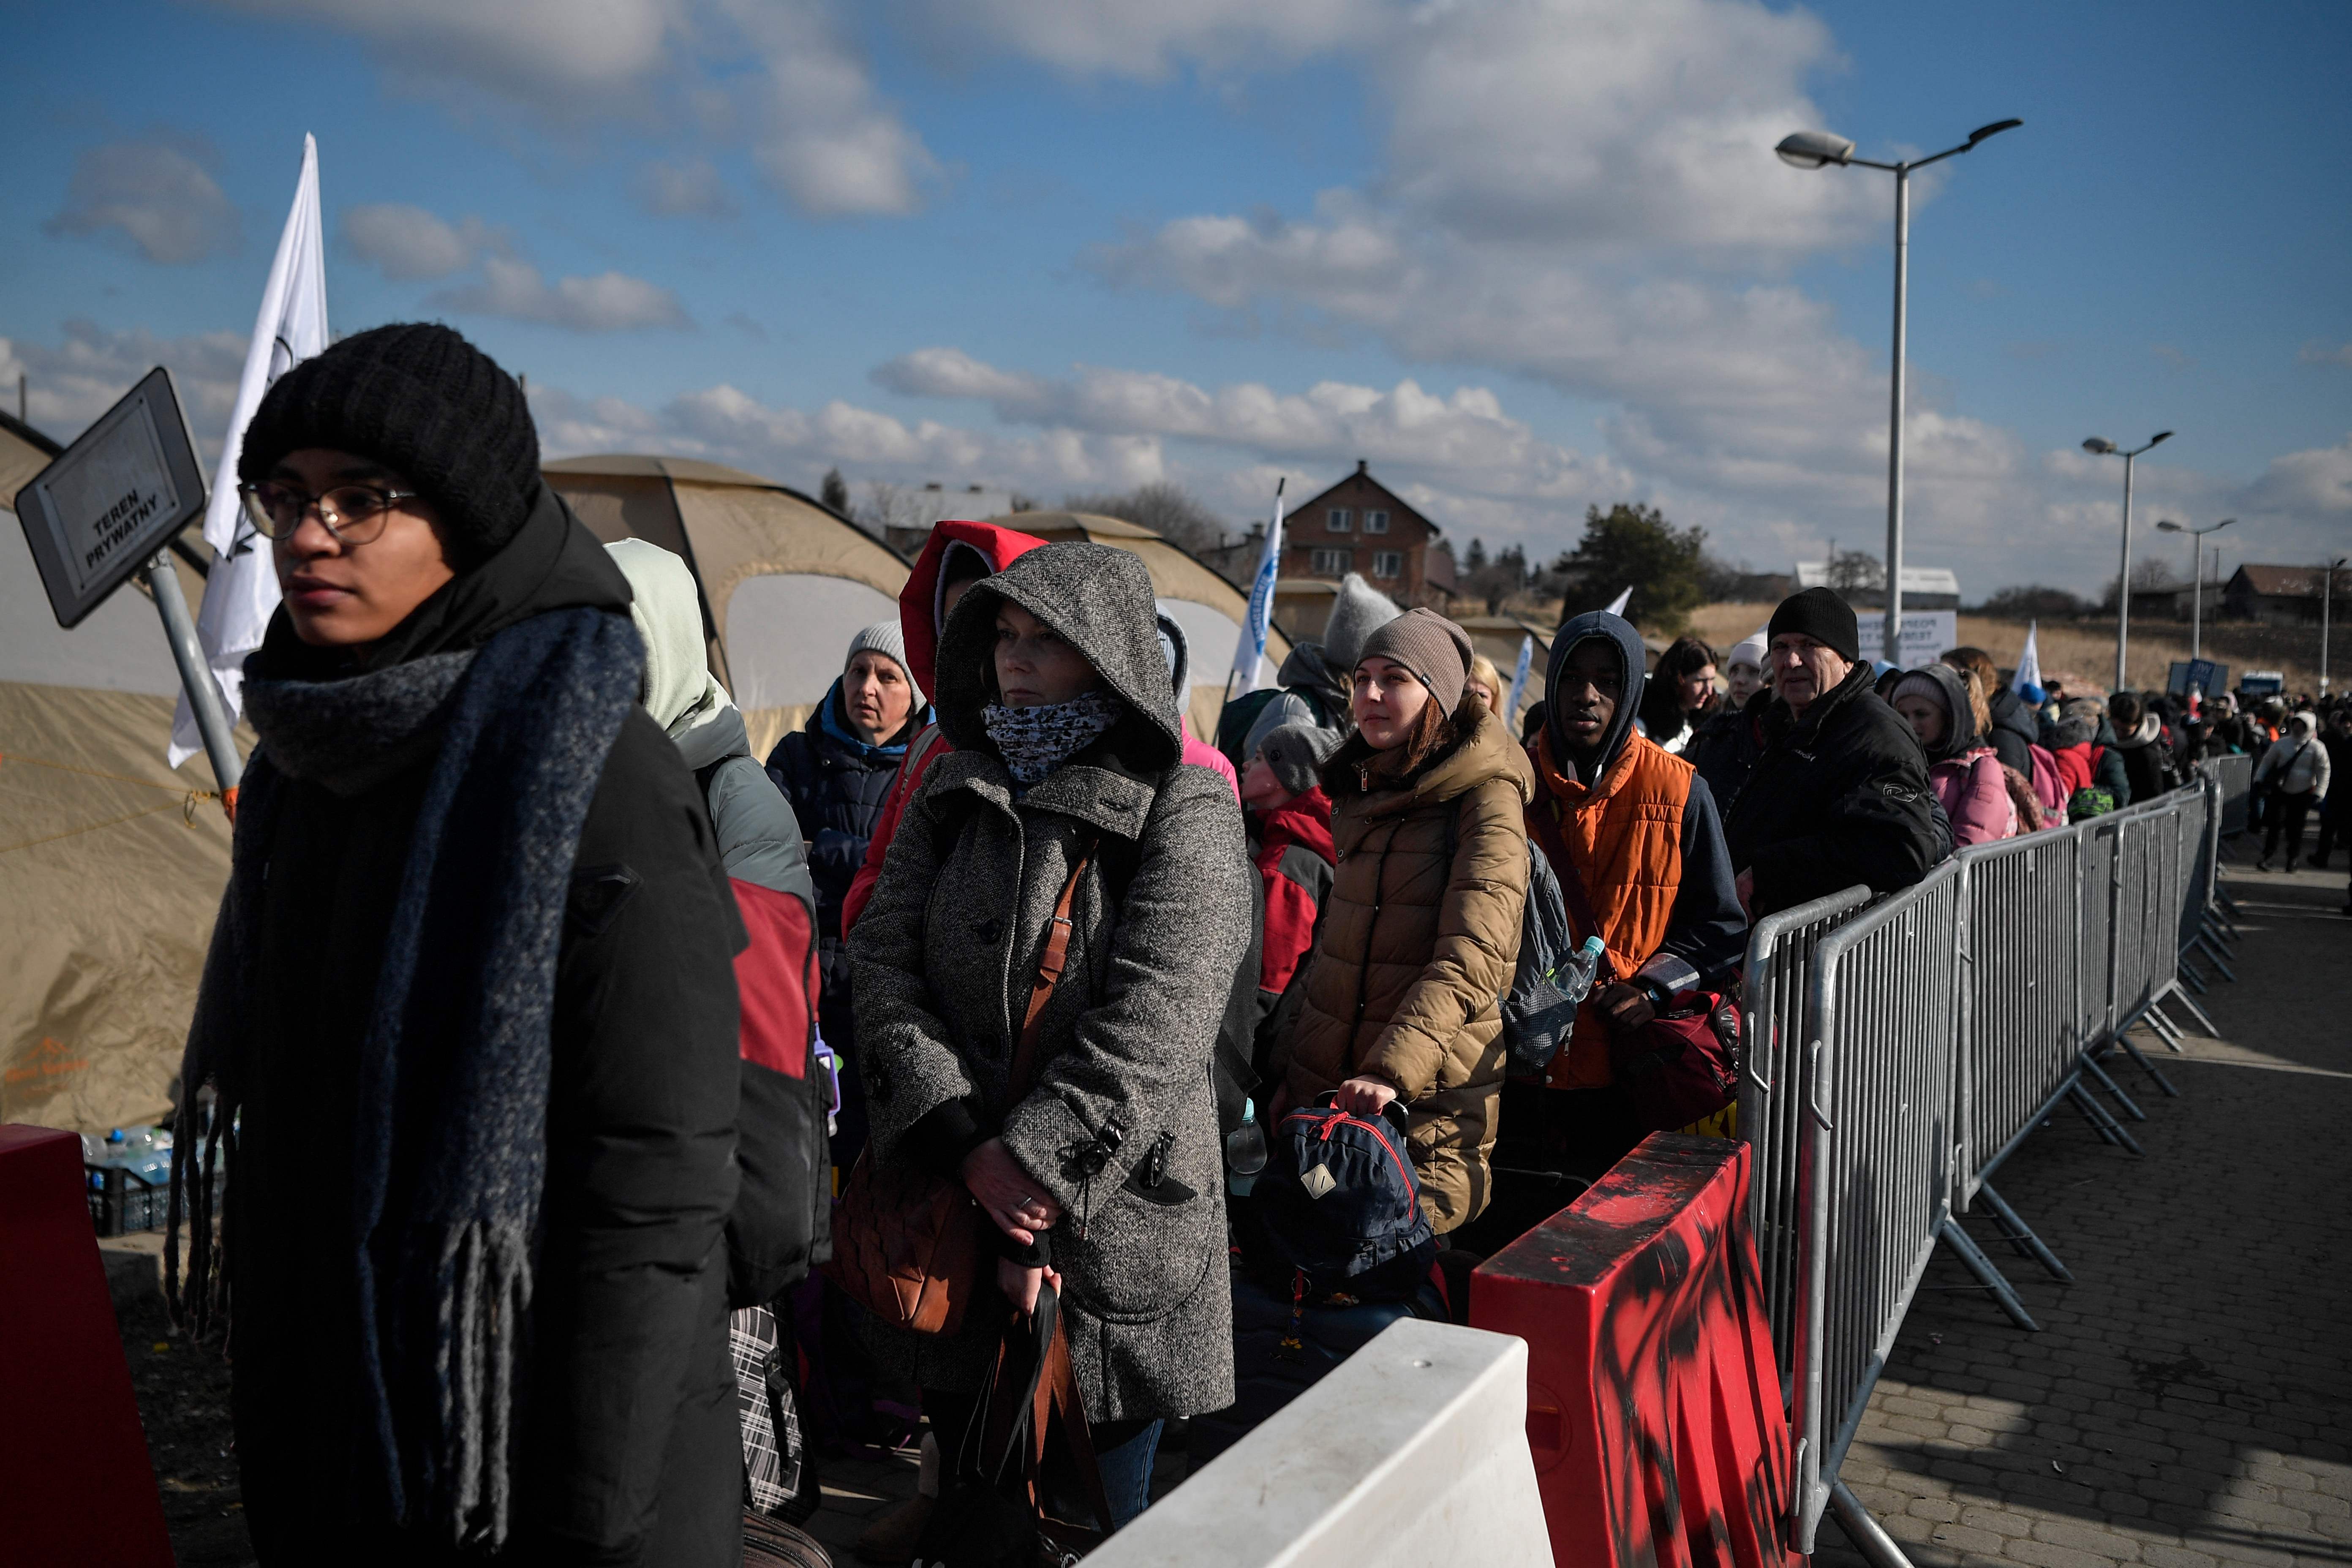 Ukrainians wait to border buses after crossing the border into Poland